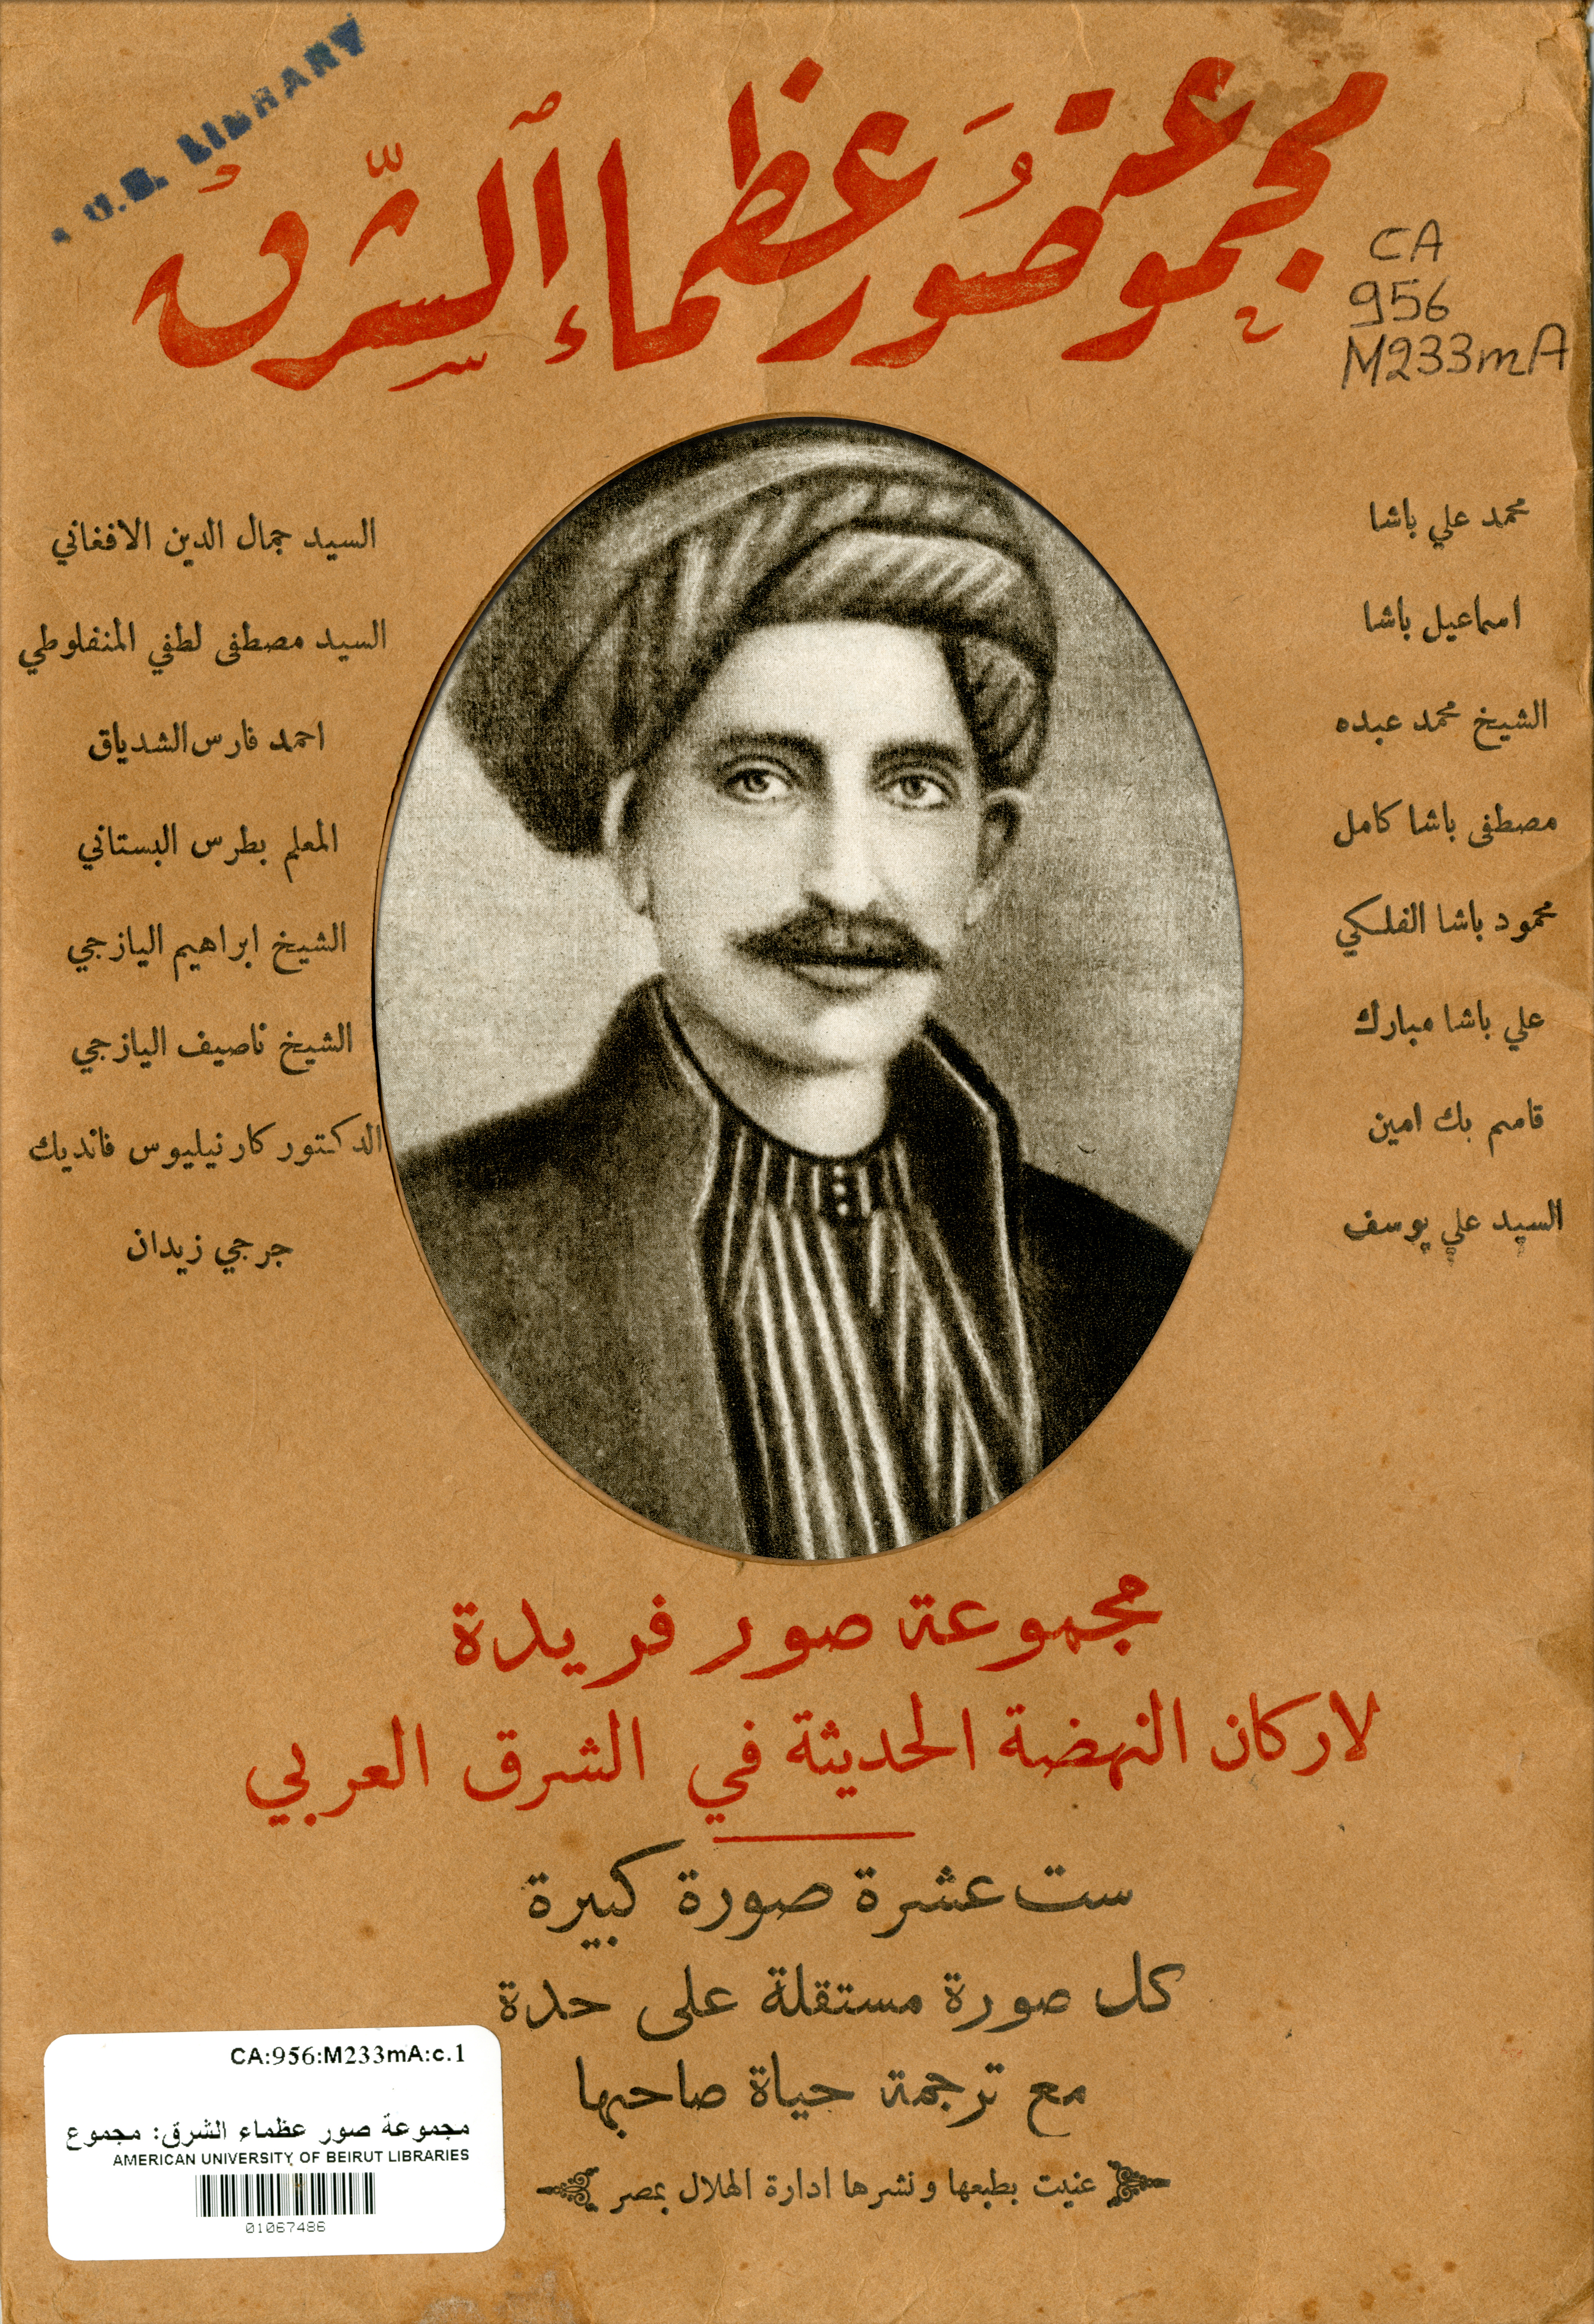 “Image Collection of Eminent [Men] of the East.” Cairo: al-Hilal Press, ca. 1900. AUB Library/Archives (CA:956:M233mA:c.1)